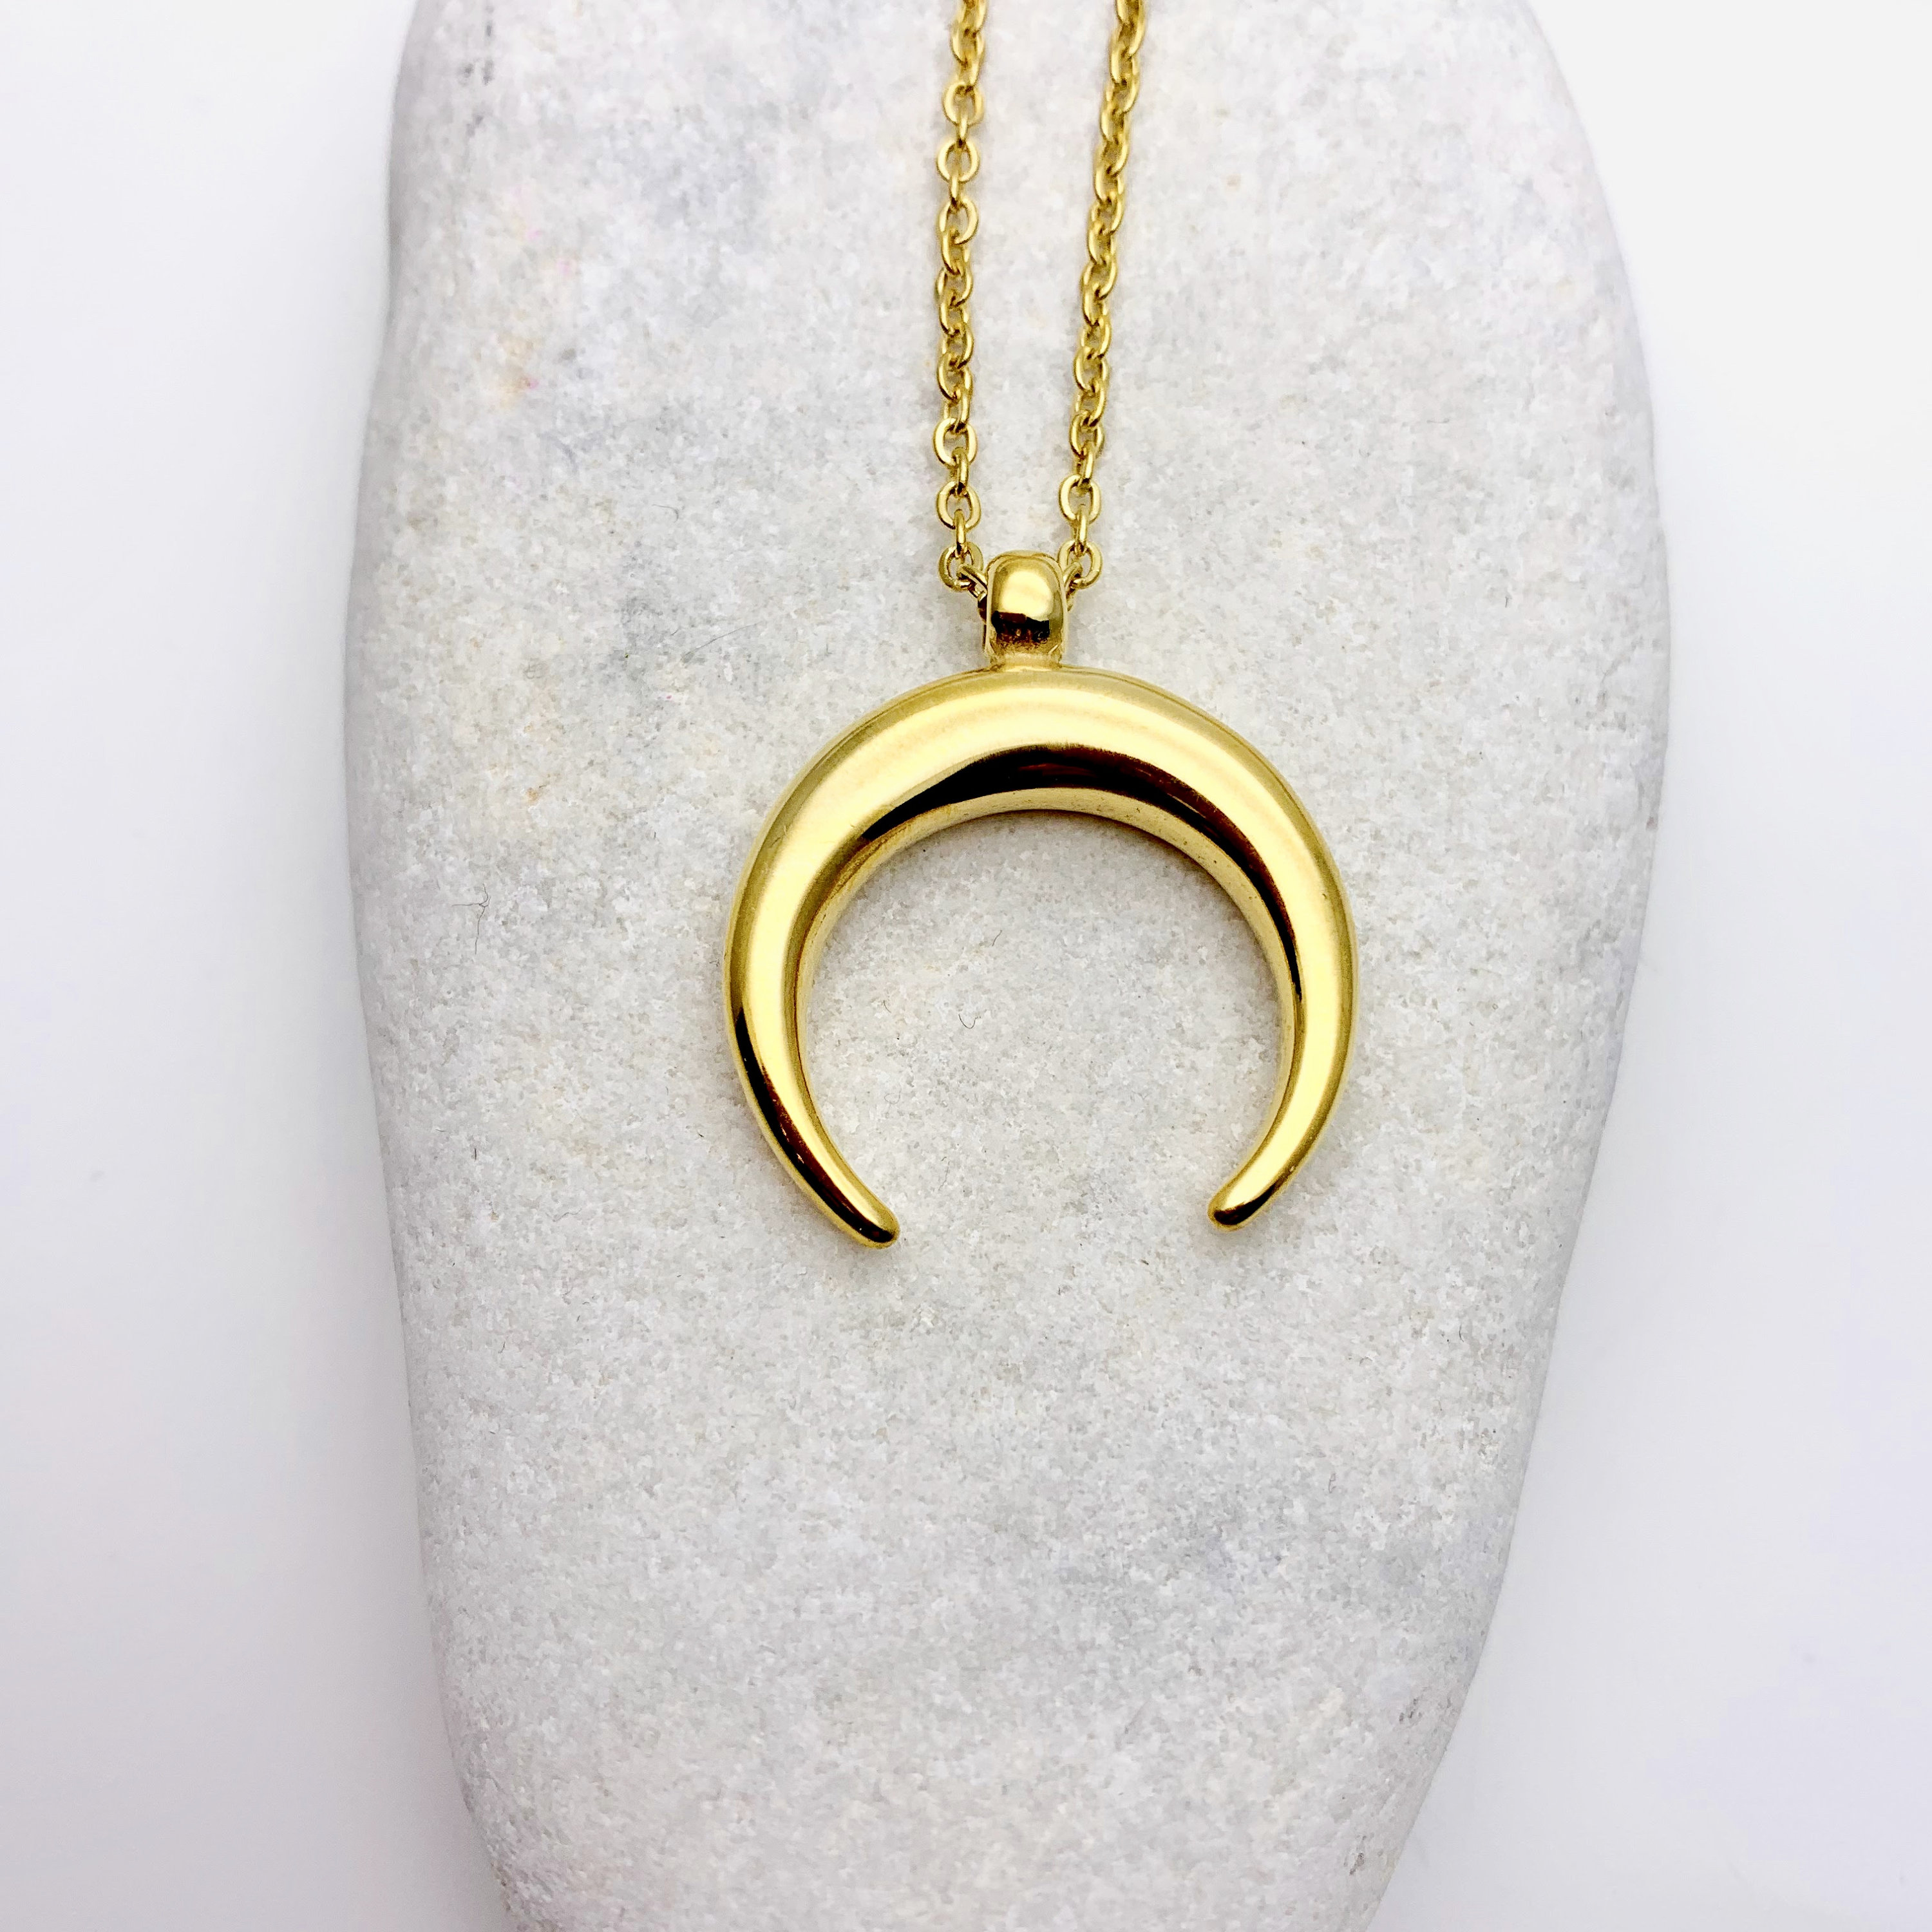 Horn Necklace Crescent Moon Necklace Gold Or Silver Gold Tone